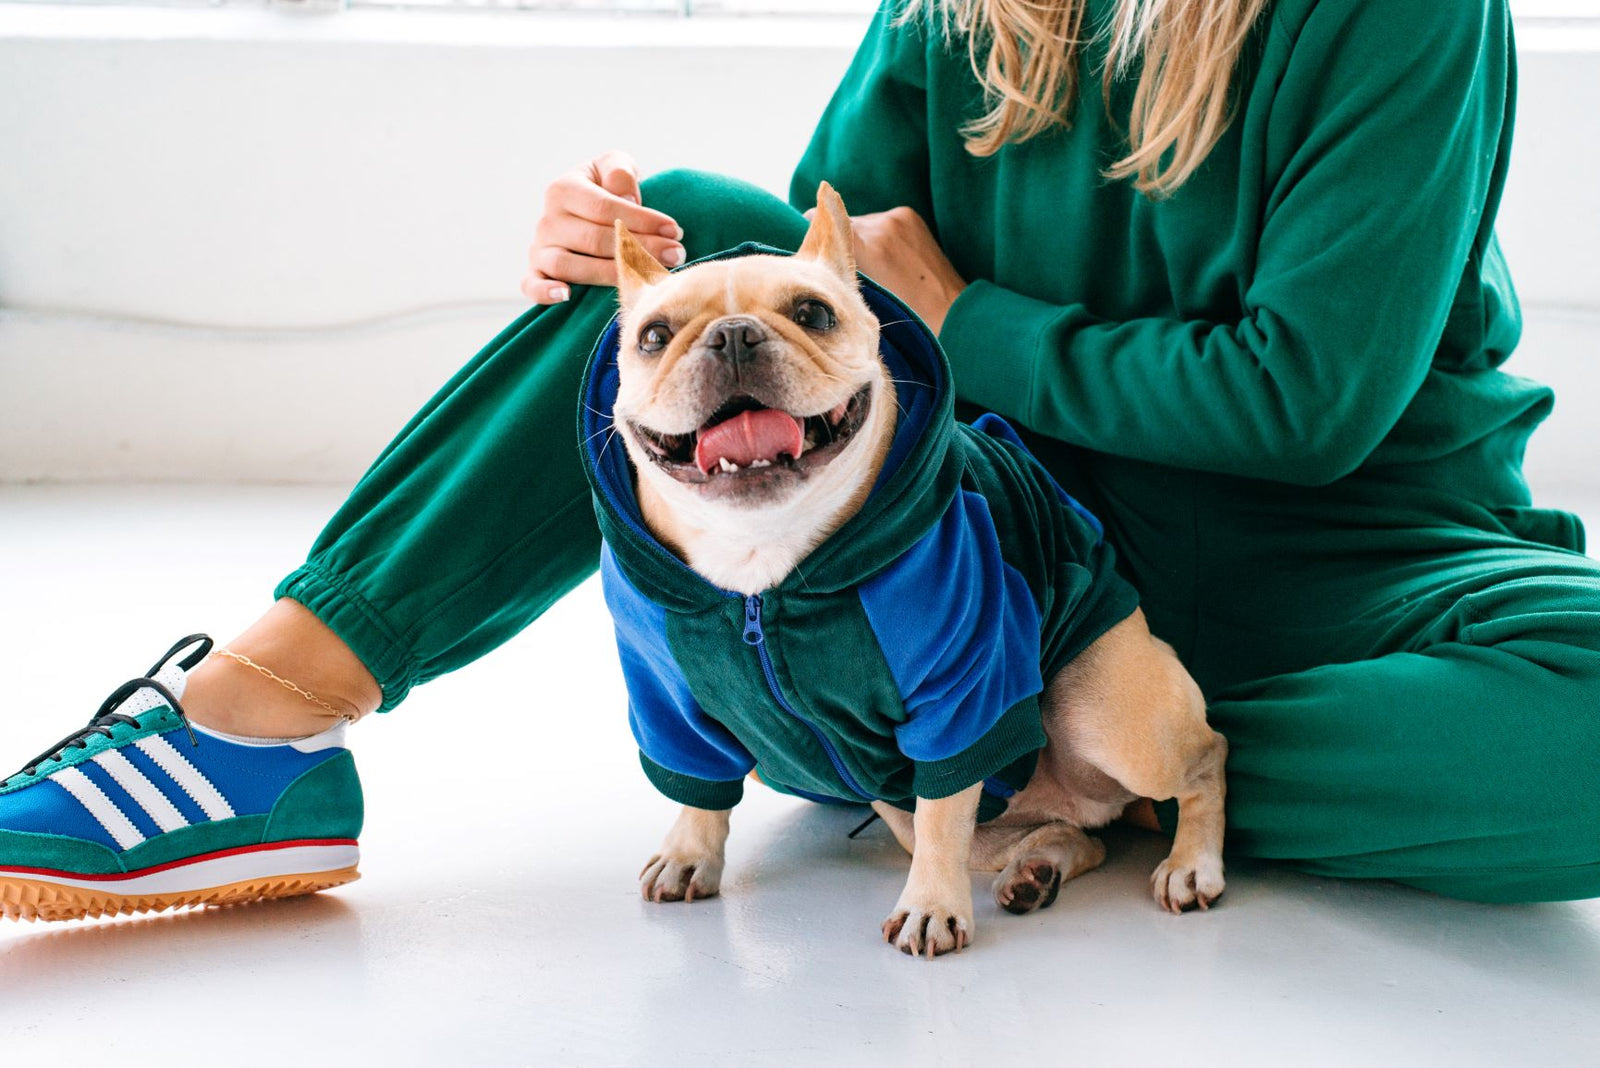 From Brrr to Happy Barks: What to Look for in Doggy Winter Gear